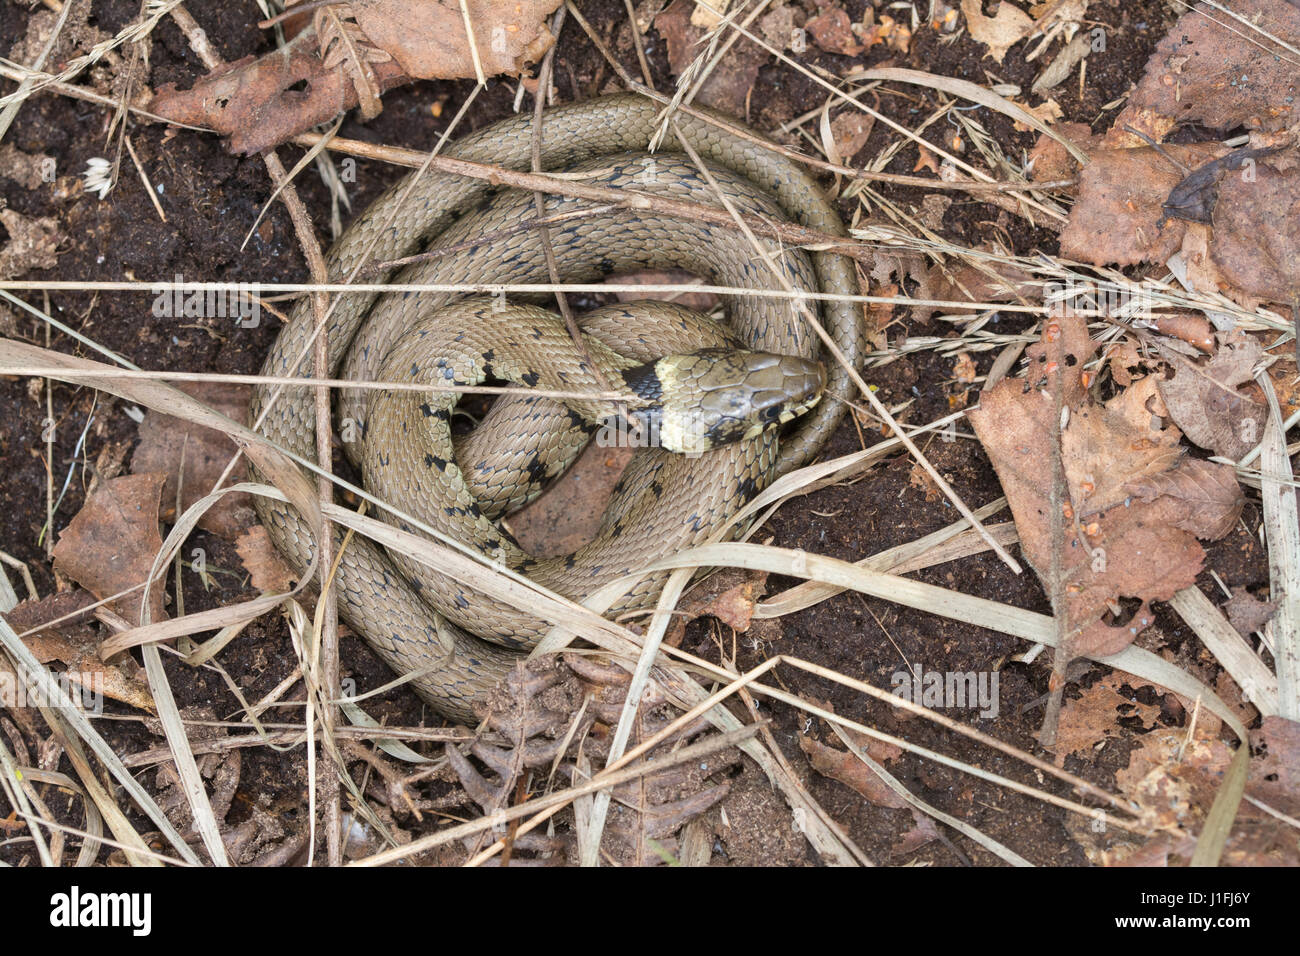 Close-up of young grass snake (Natrix natrix) coiled up in Surrey heathland habitat in the UK Stock Photo